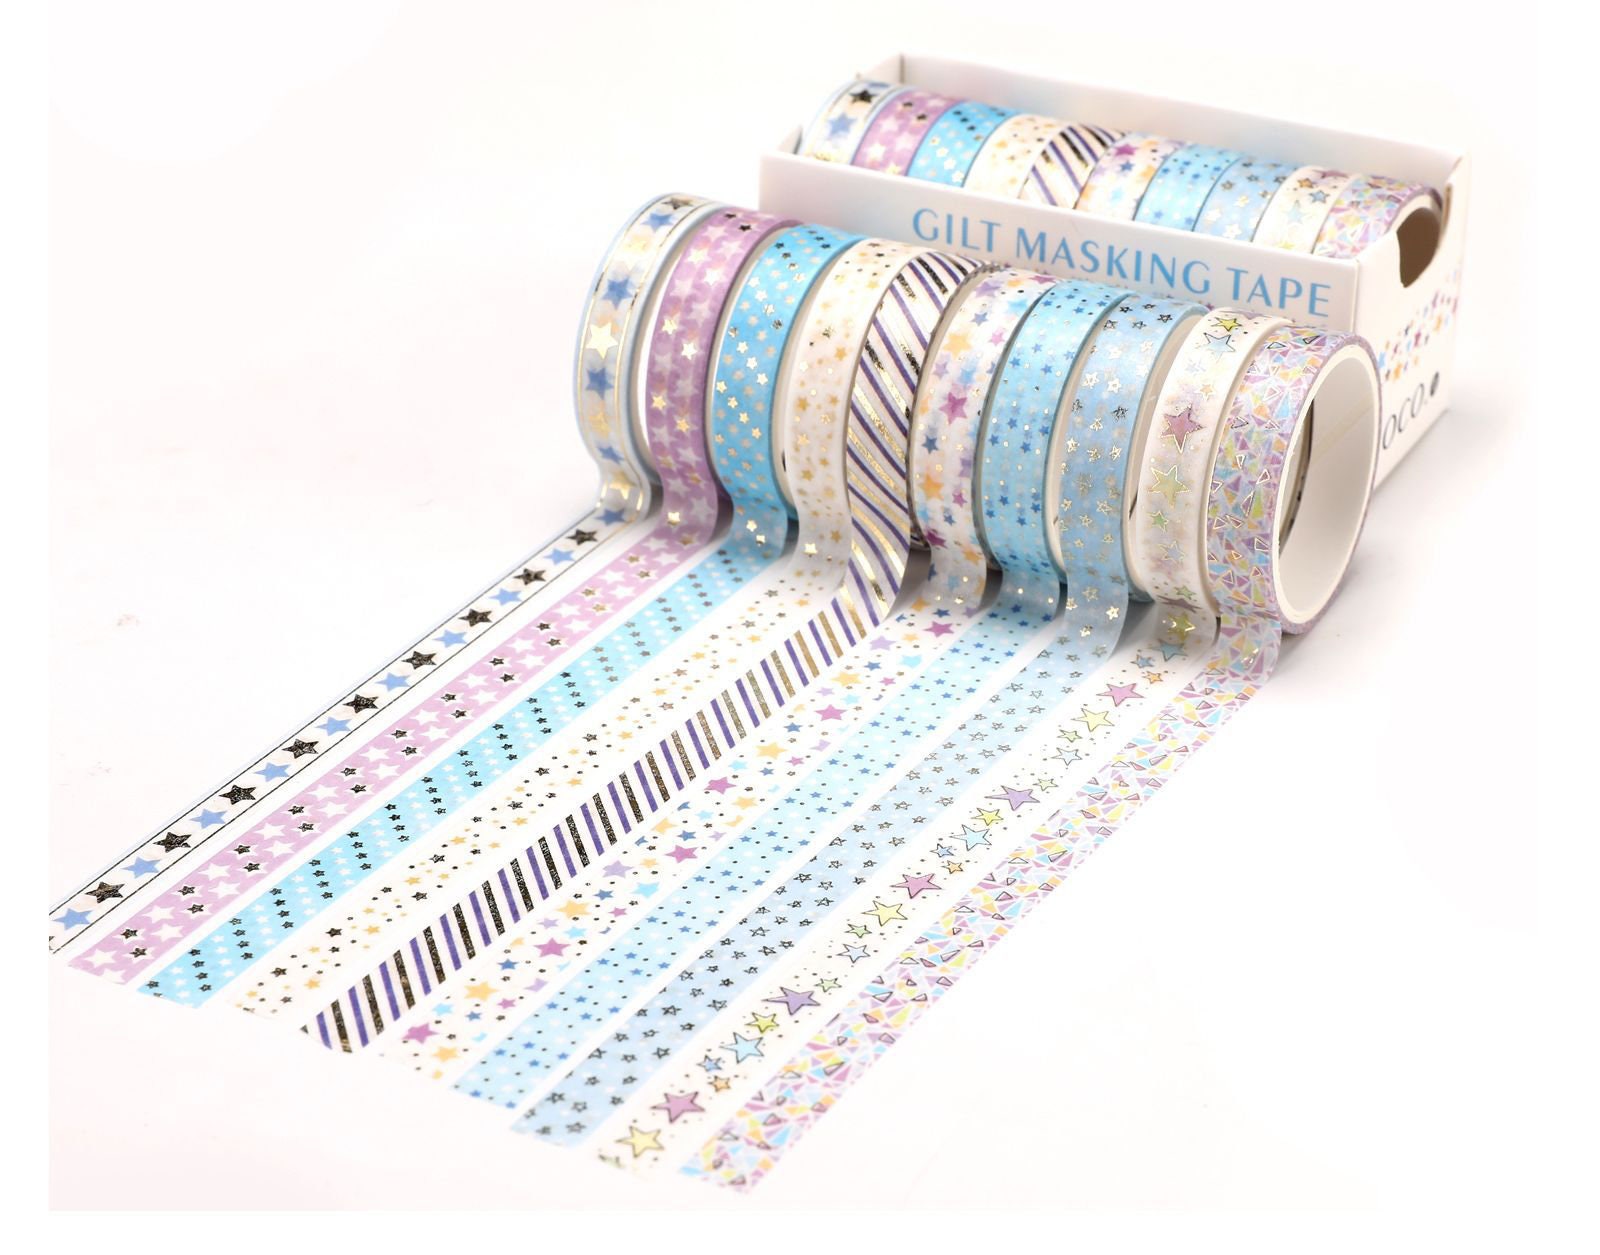 Mini Envelope Washi Tape: Boxed Set of 10 Rolls - 8mm – The Paper